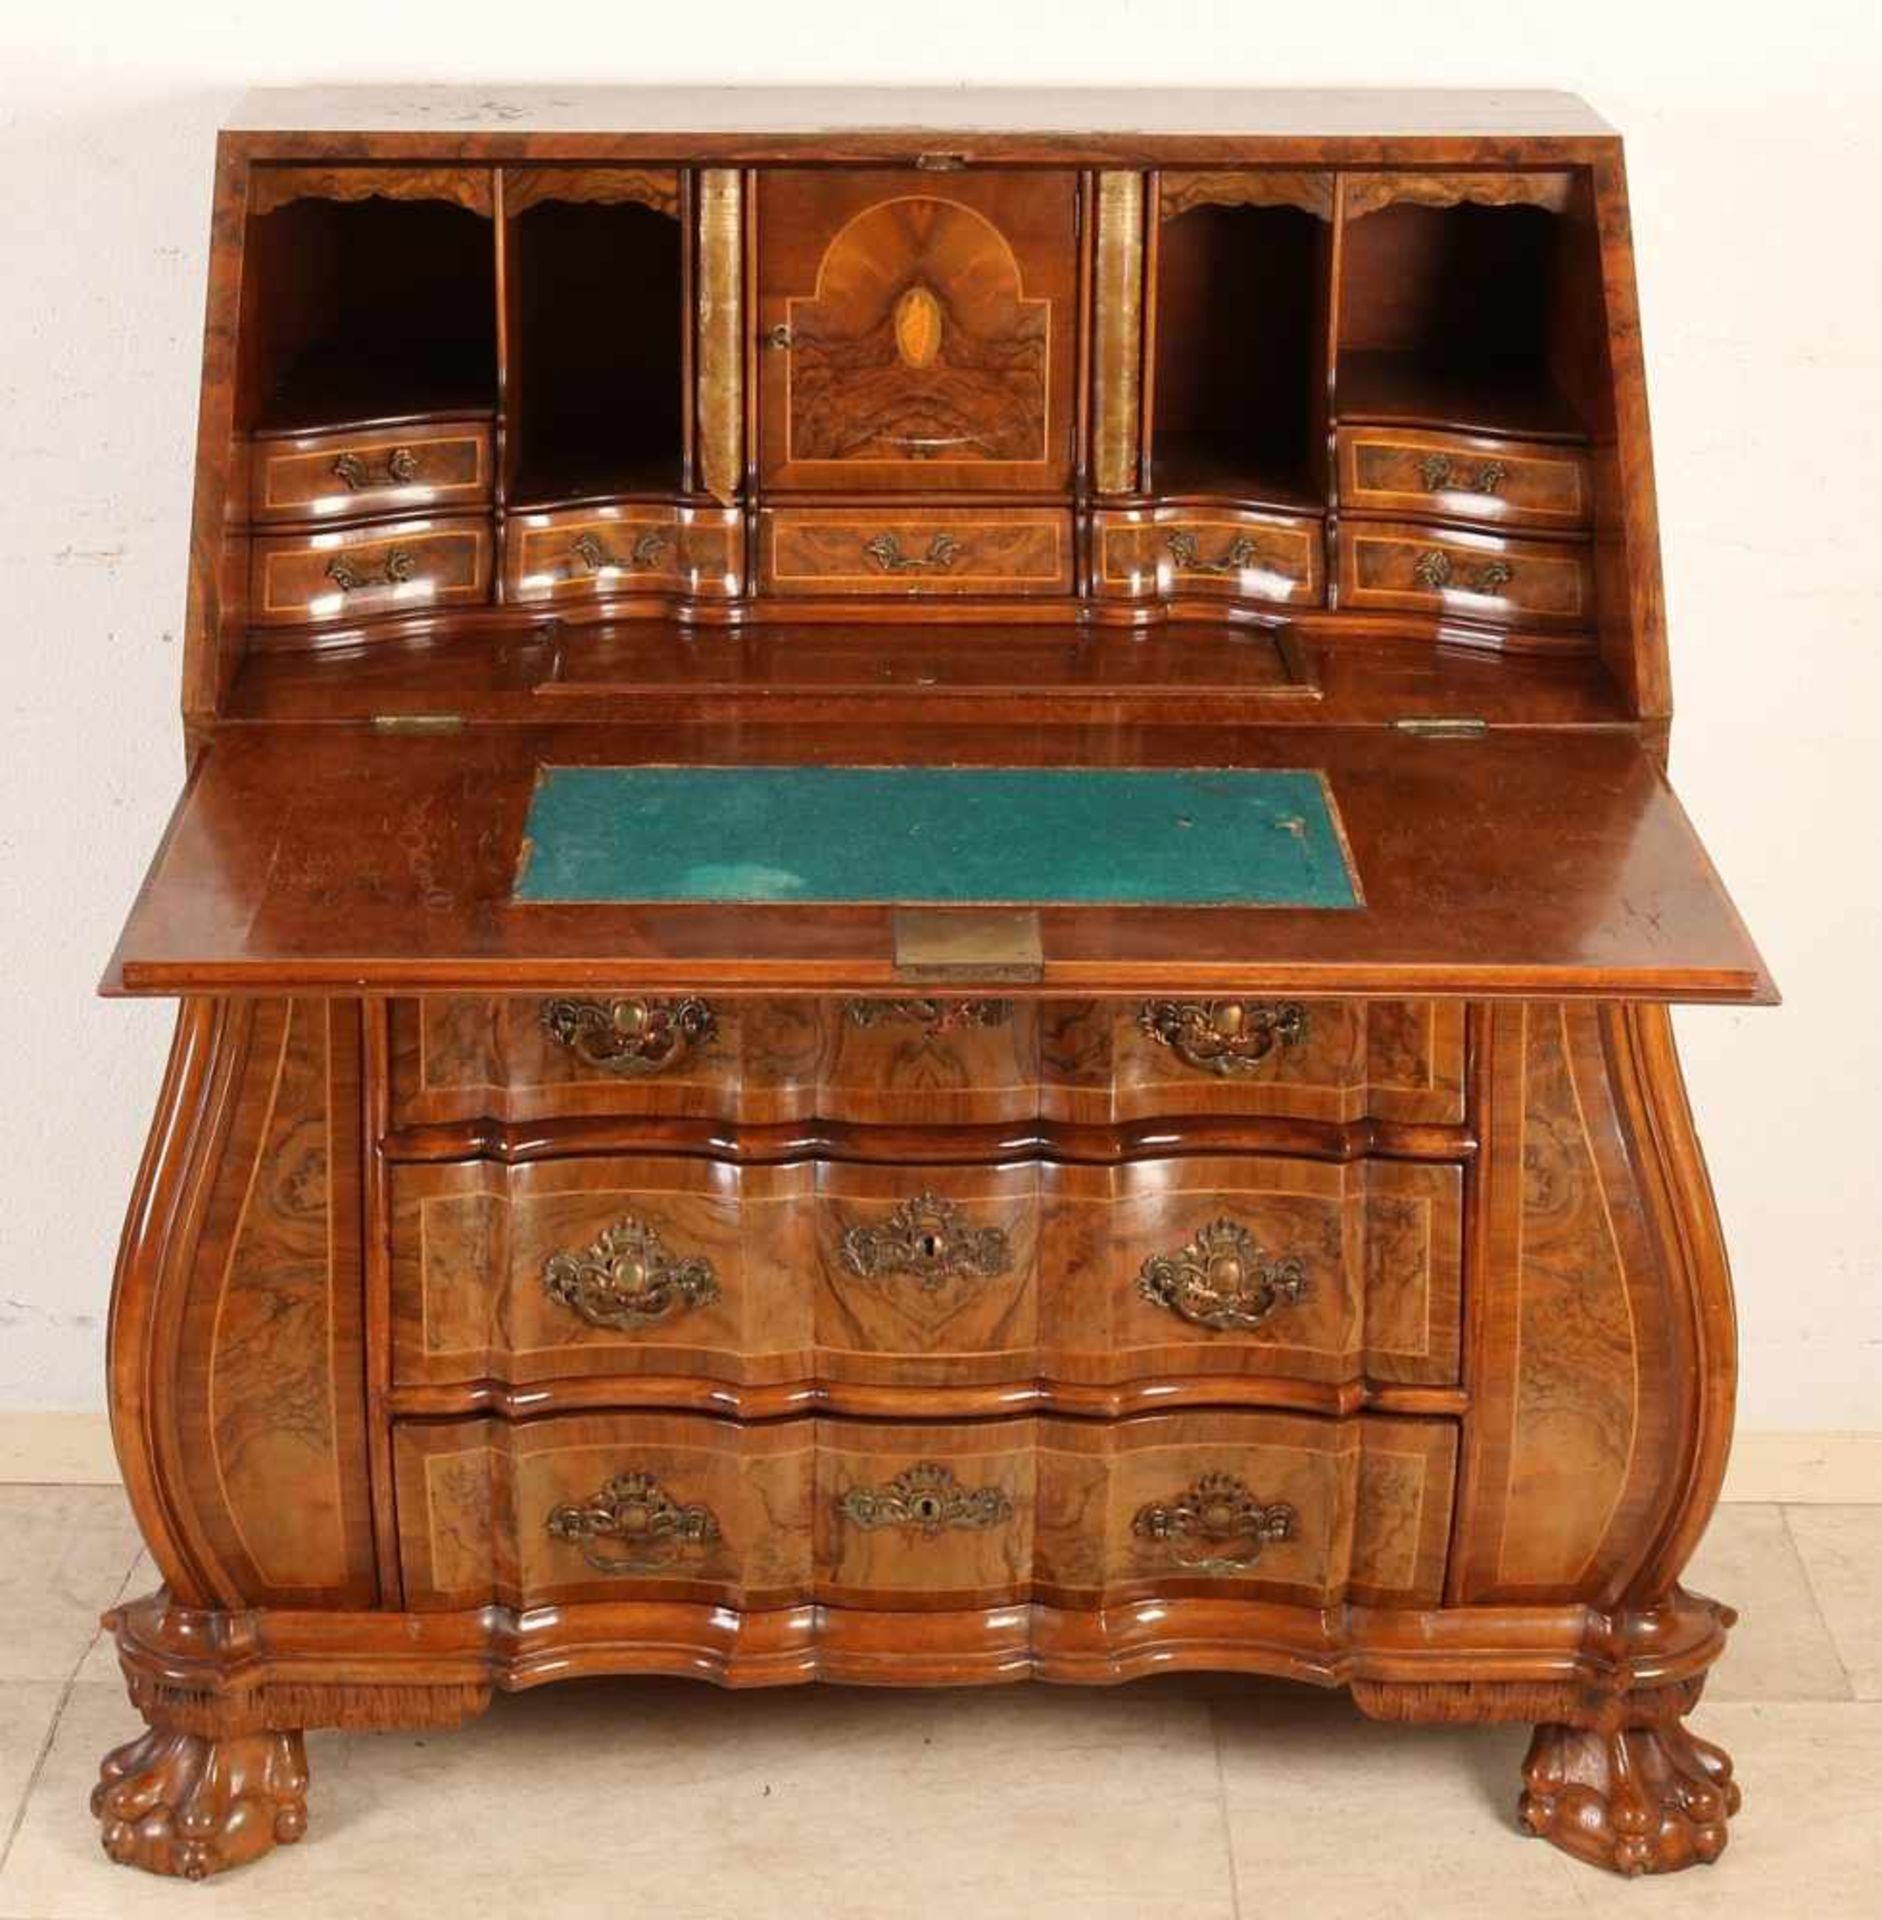 Dutch burl Baroque-style organ desk with curved front and double knees and claw feet. Second half